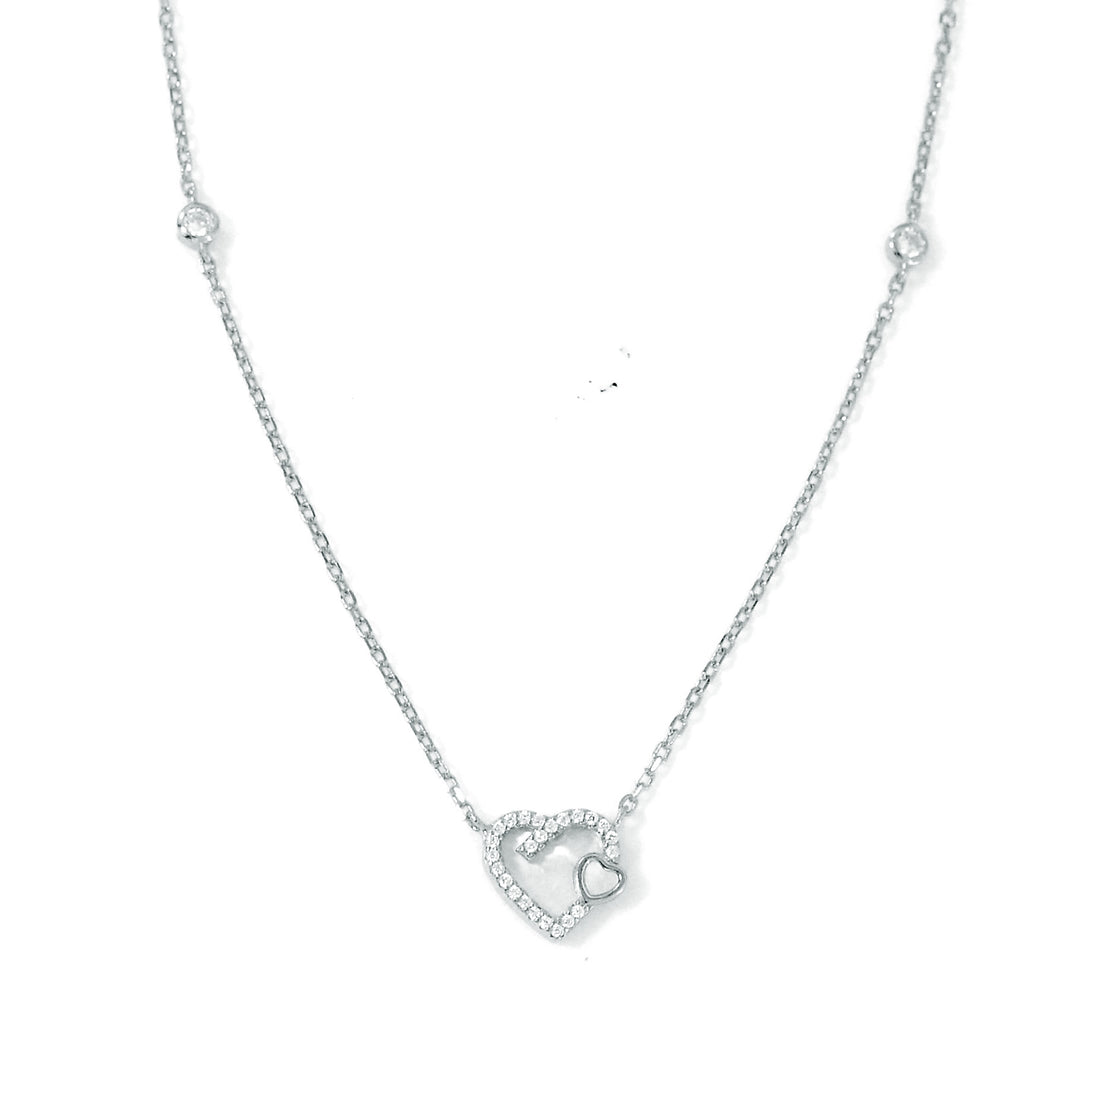 Elegant Silver Necklace with Heart Shape Mother of Pearl and Sparkling Zircons